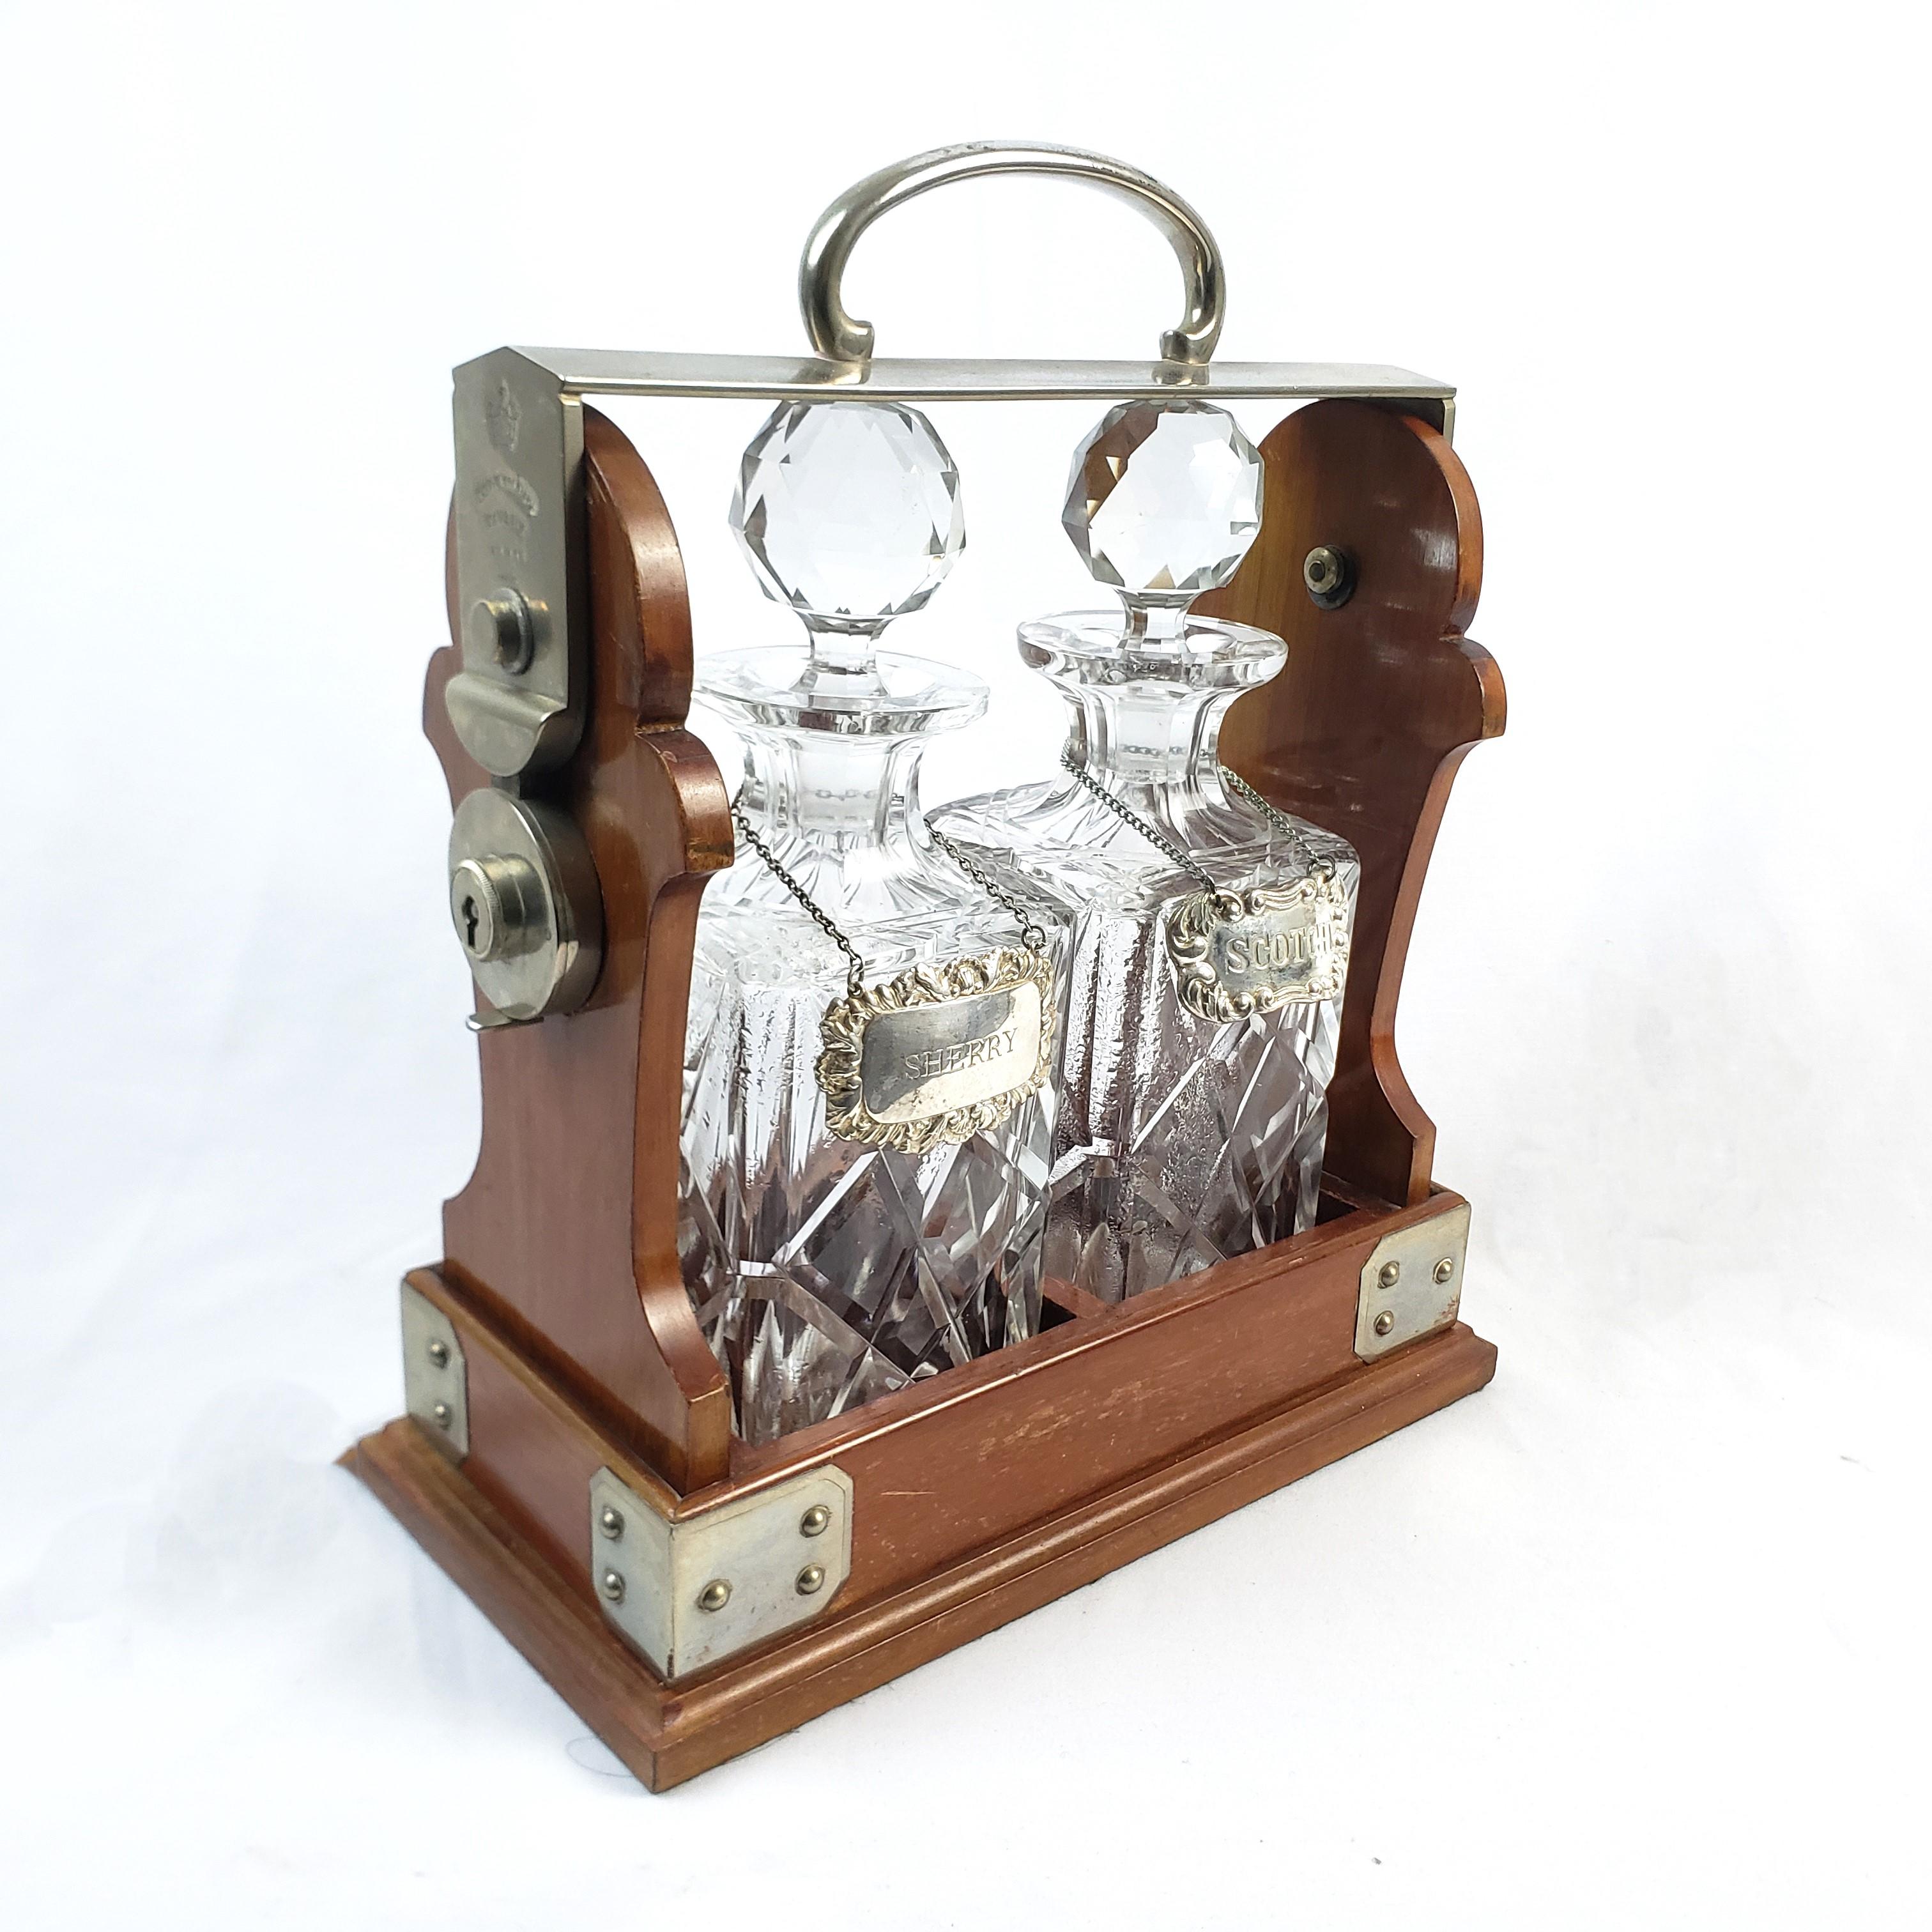 This antique tantalus set was made by the well known Betjemmin's & Sons of London, England and dates to approximately 1900 and done in the period Edwardian style. The carriage is composed of wood with silver plated corner accents and tilt mechanism.